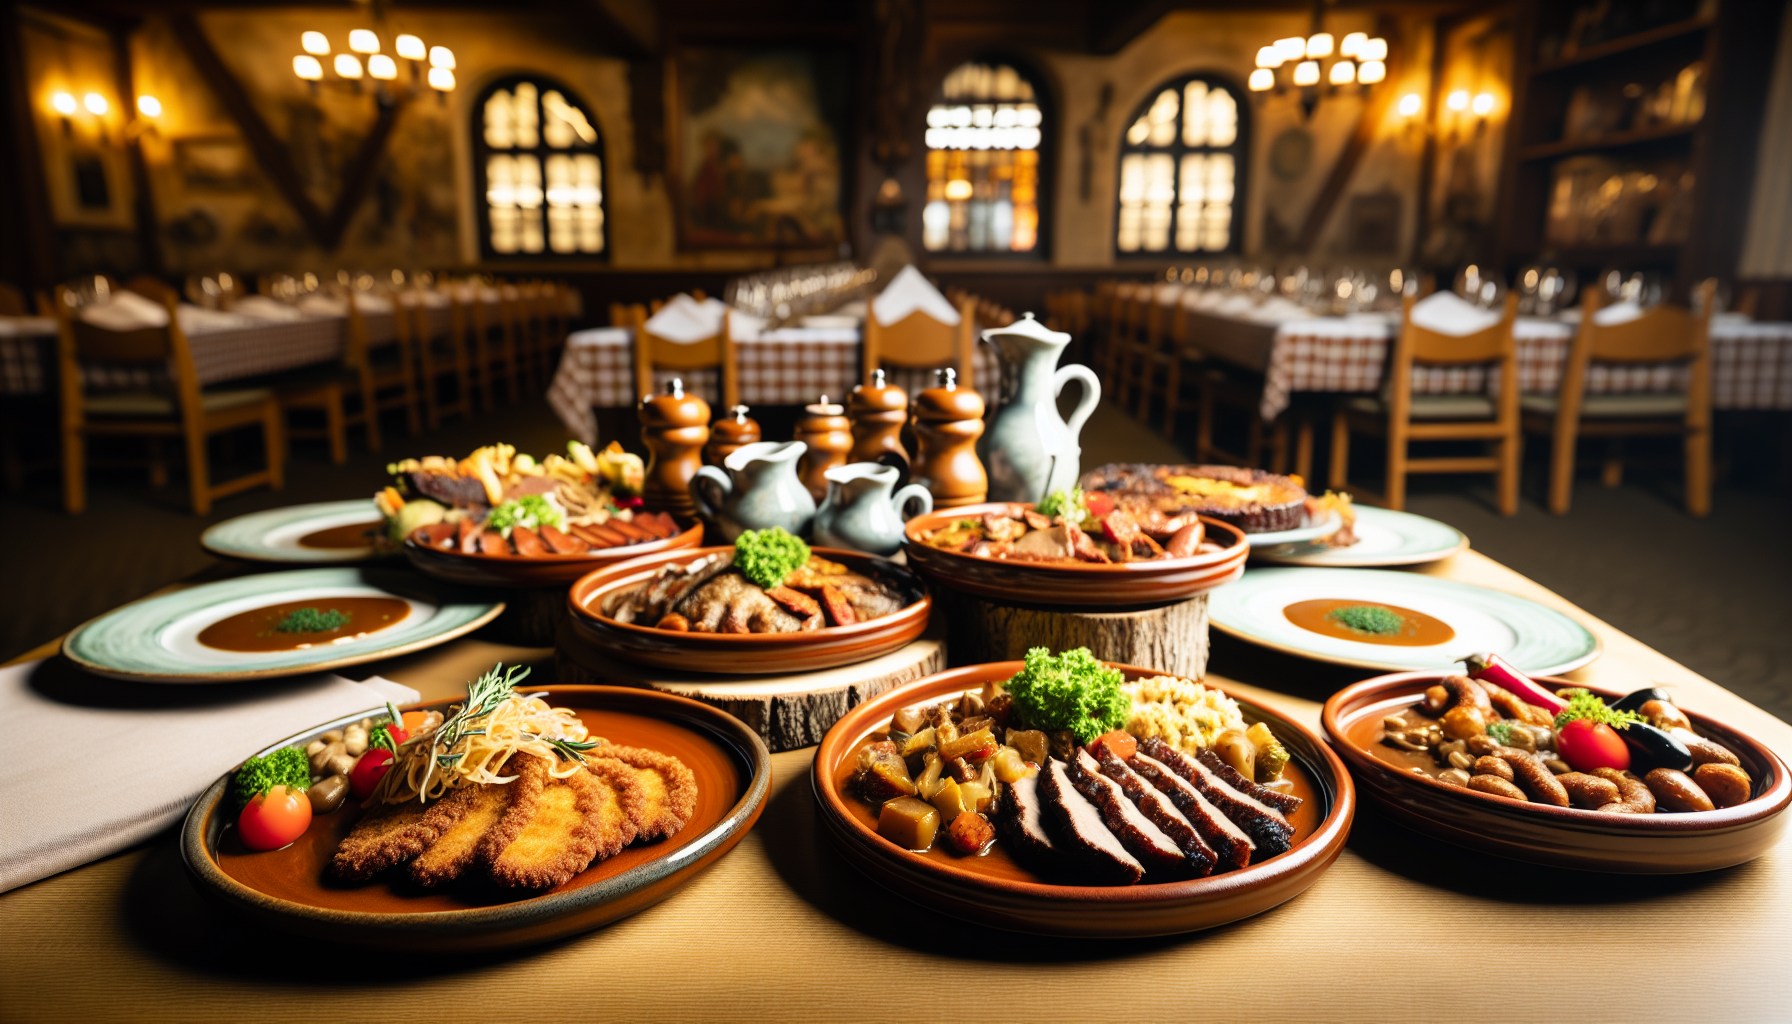 Assortment of traditional German dishes at Old Heidelberg